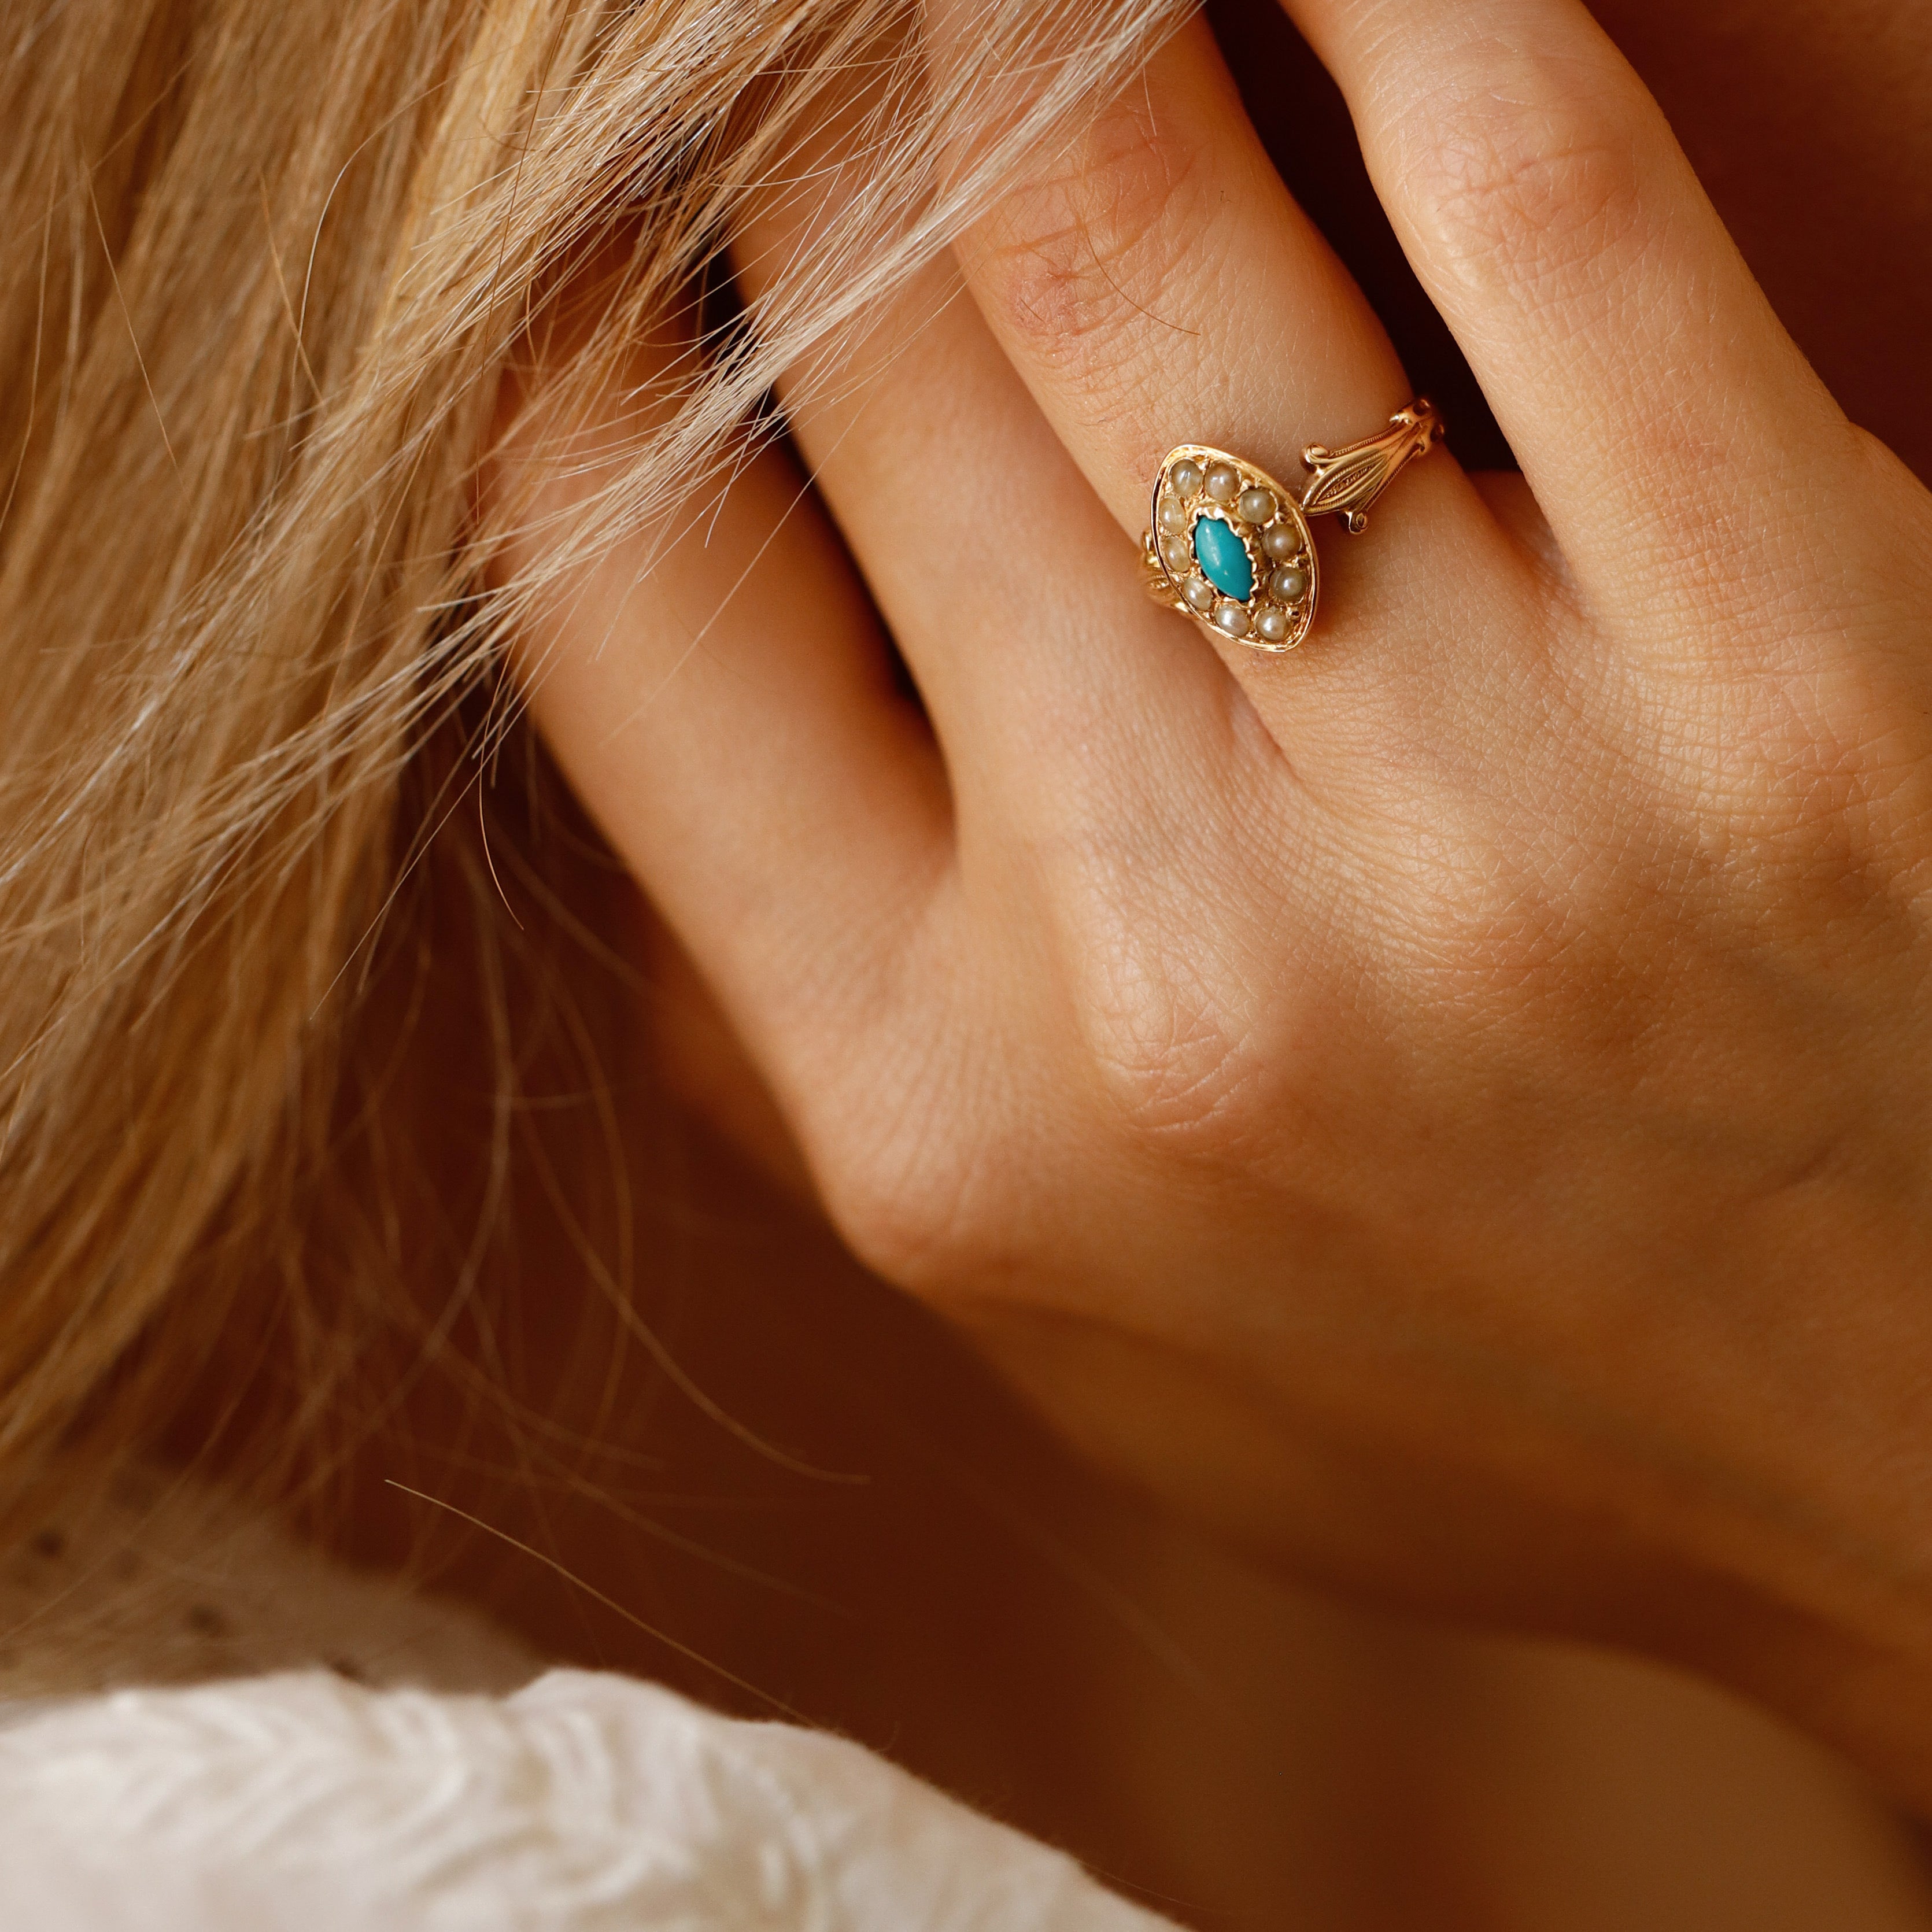 Bague ancienne turquoise